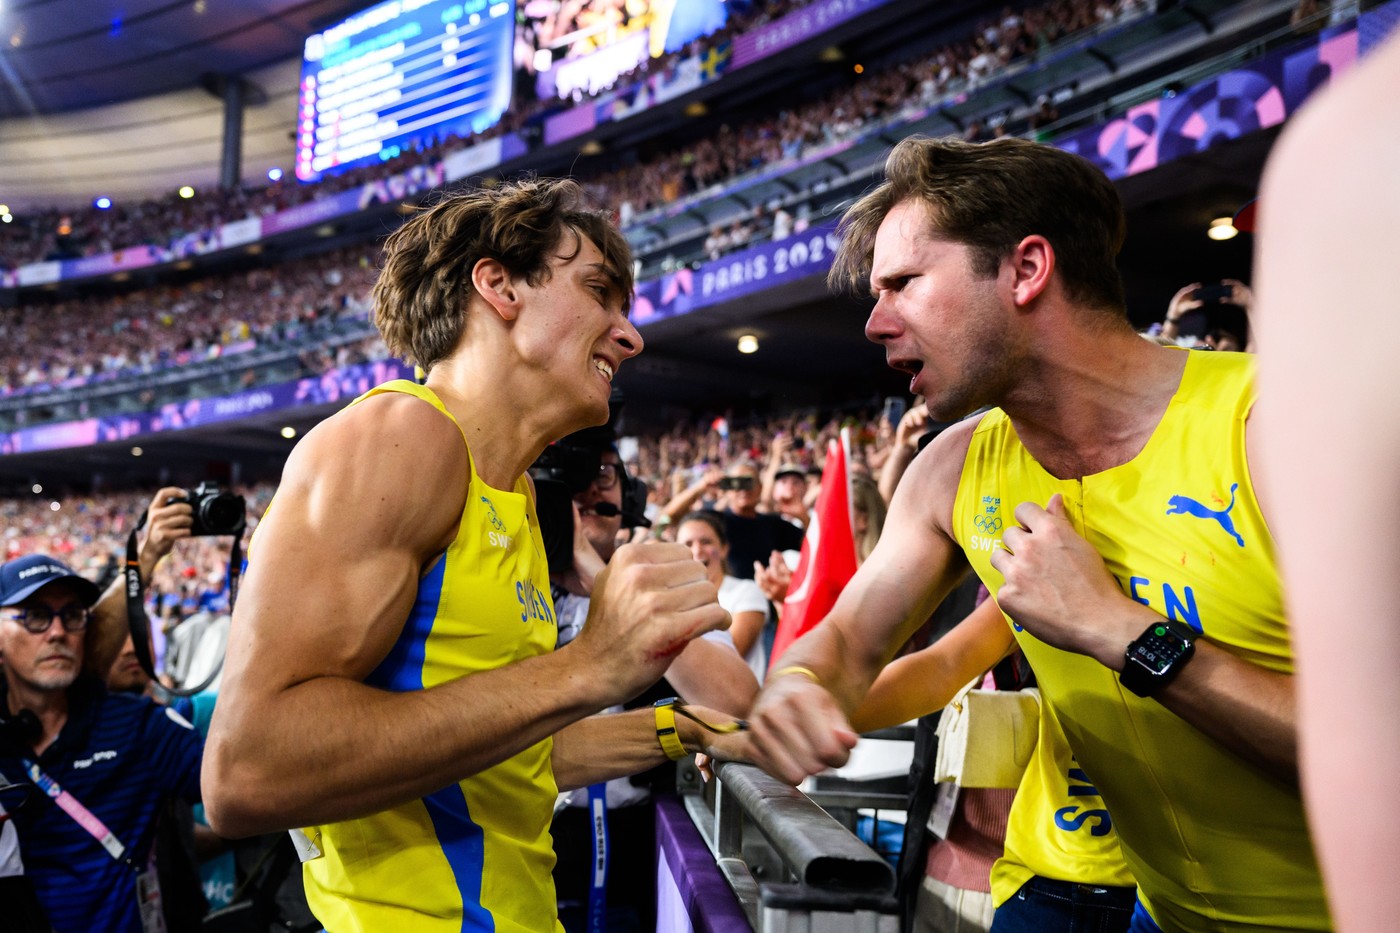 Armand Duplantis of Sweden celebrates after clearing 6,25 and setting a new world record in men's athletics pole vault final during day 10 of the Paris 2024 Olympic Games on August 5, 2024 in Paris.
Paris 2024 Olympics, Day 10, Athletics, France - 05 Aug 2024,Image: 896313558, License: Rights-managed, Restrictions: , Model Release: no